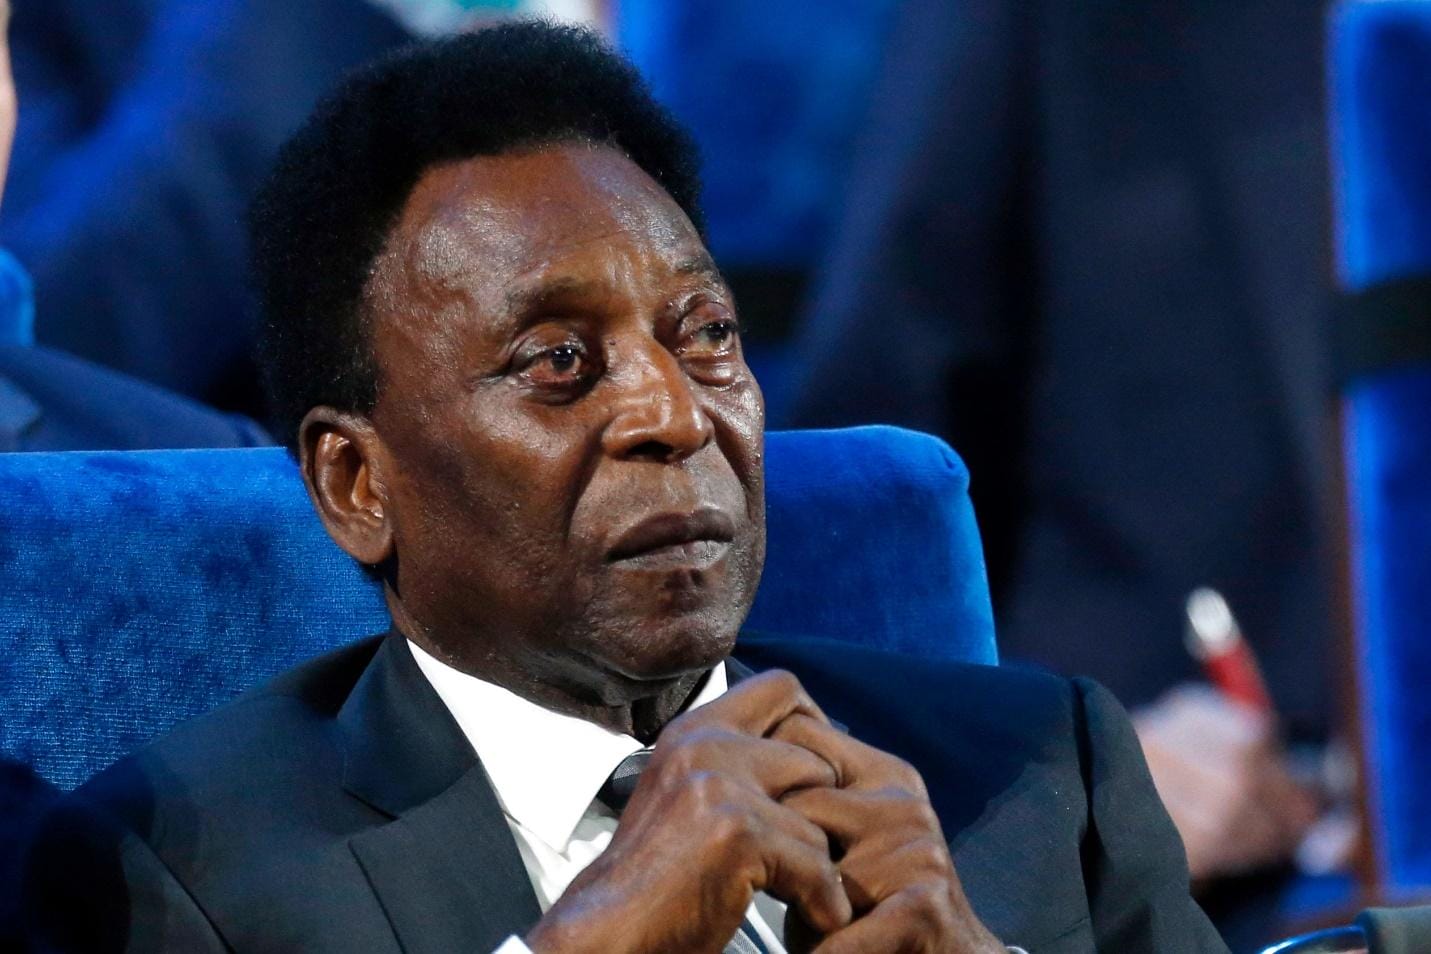 Pelé says he's 'strong' and 'with a lot of hope' in social media update | CNN